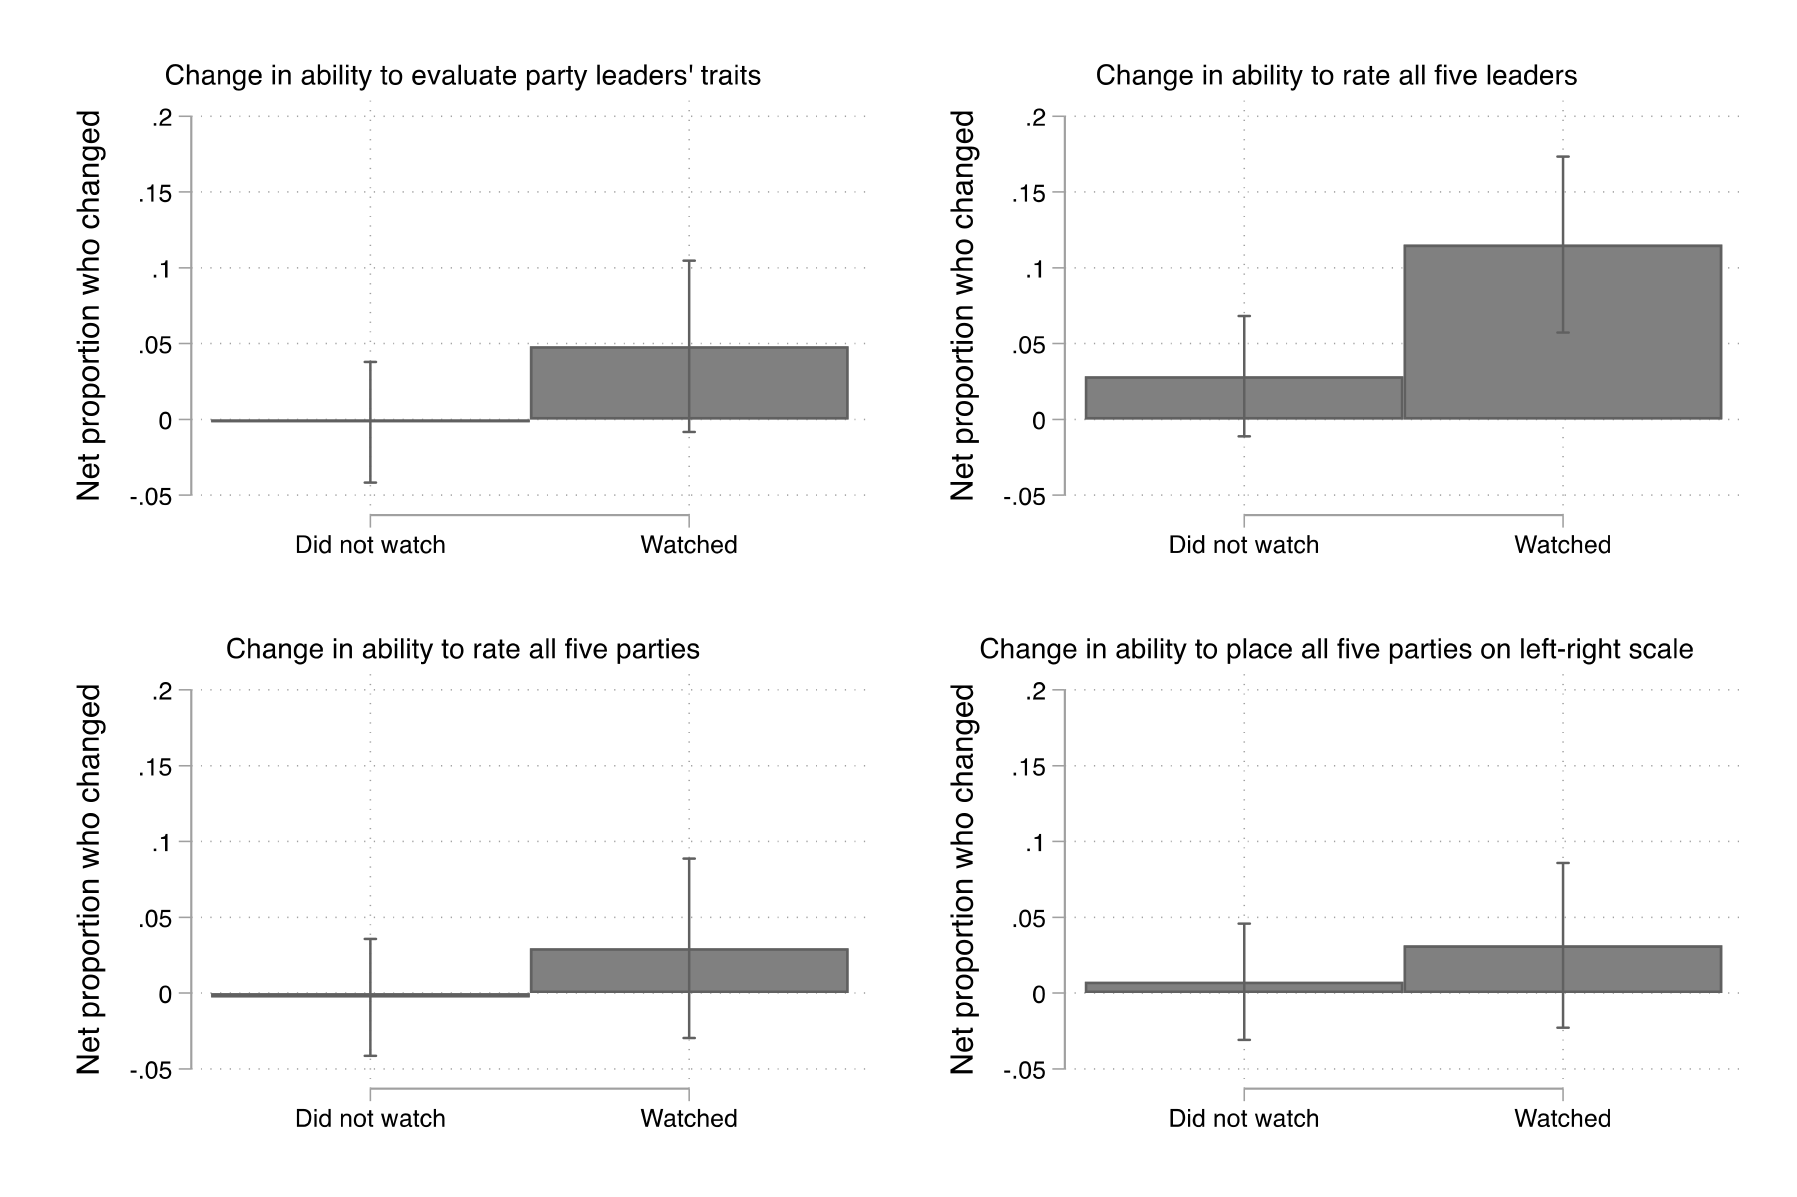 Figure 25. This figure shows the impact of debate viewership on participants' ability/willingness to rate the leaders and their parties. Debate watching was associated with an increased ability to rate all five party leaders.